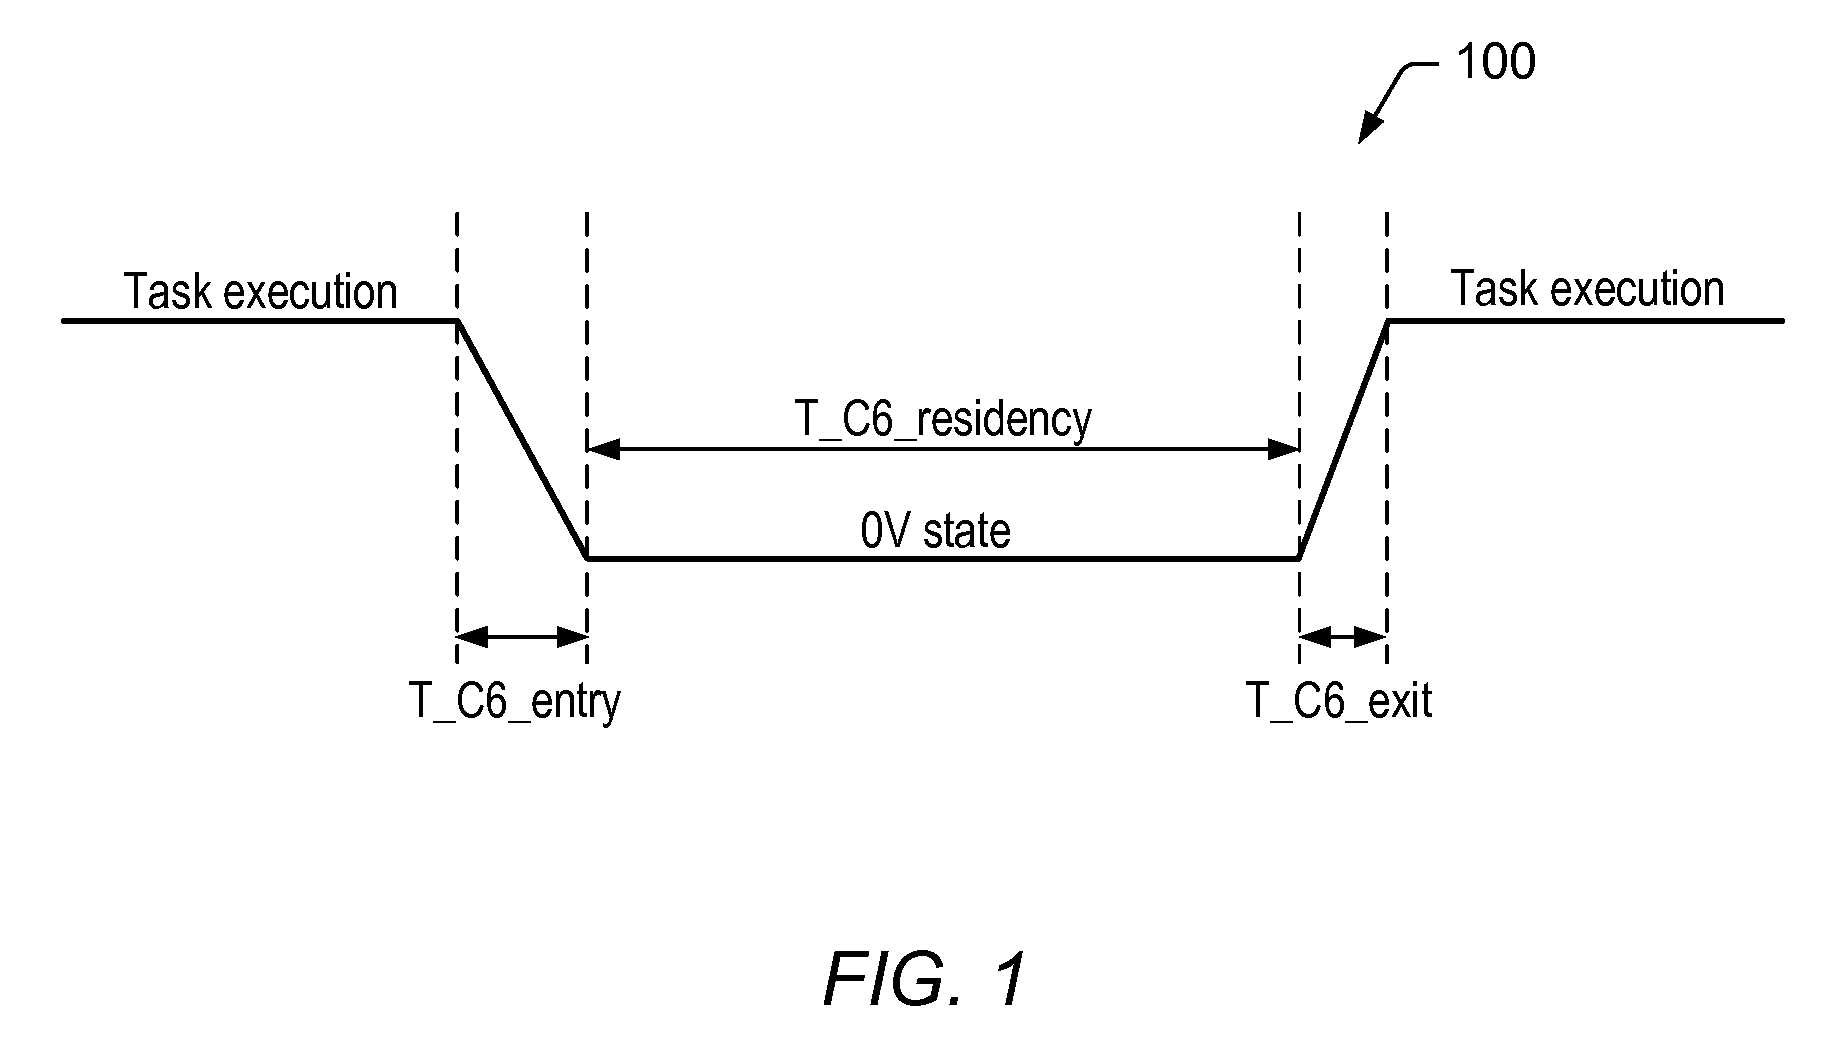 Hardware Monitoring and Decision Making for Transitioning In and Out of Low-Power State